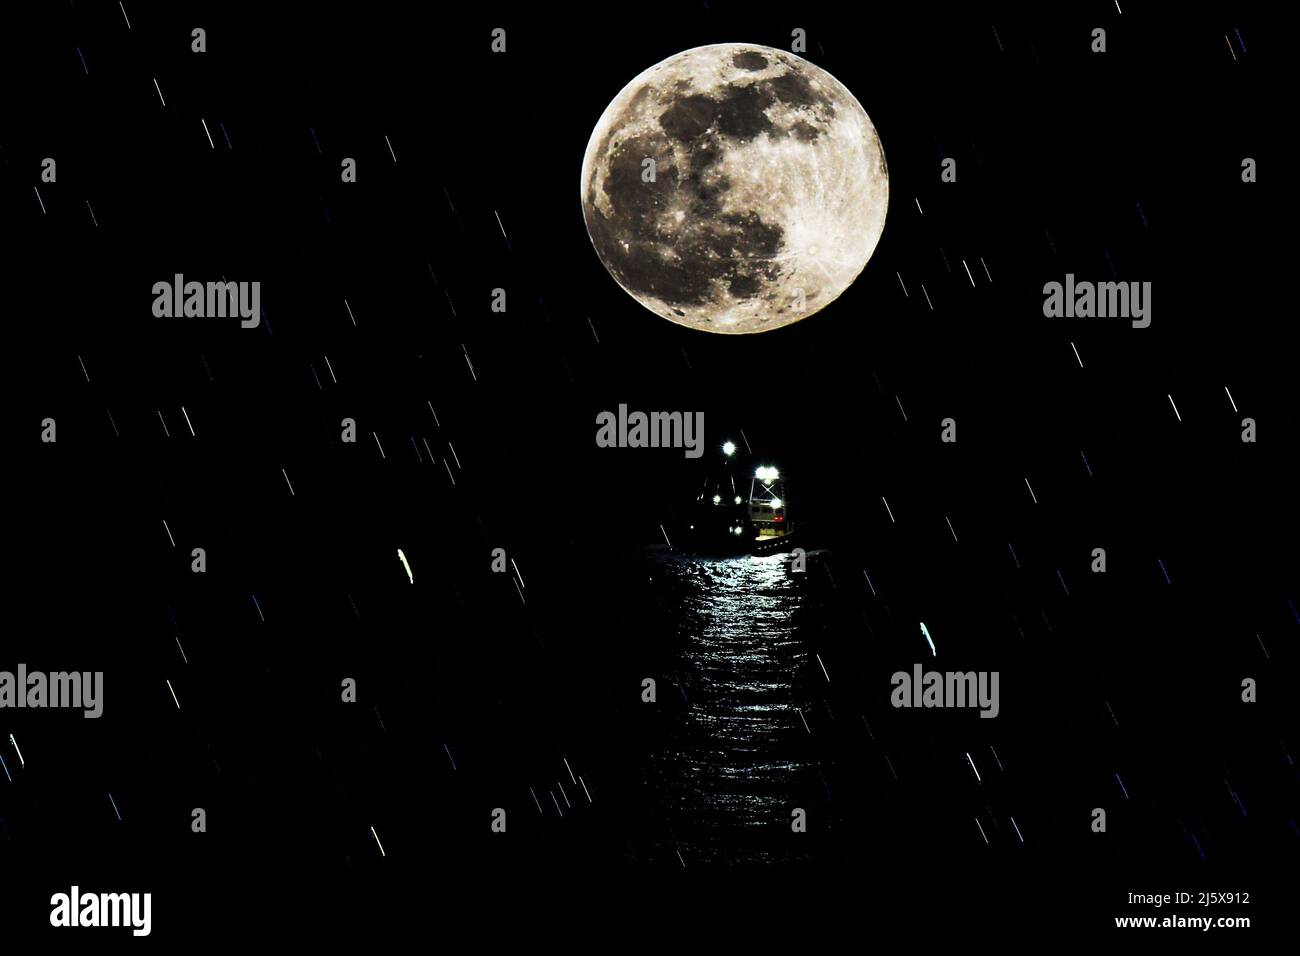 MOONLIGHT TIDE: The moon descends directly above a tugboat as a guiding light in the late night hours in the Atlantic. Stock Photo